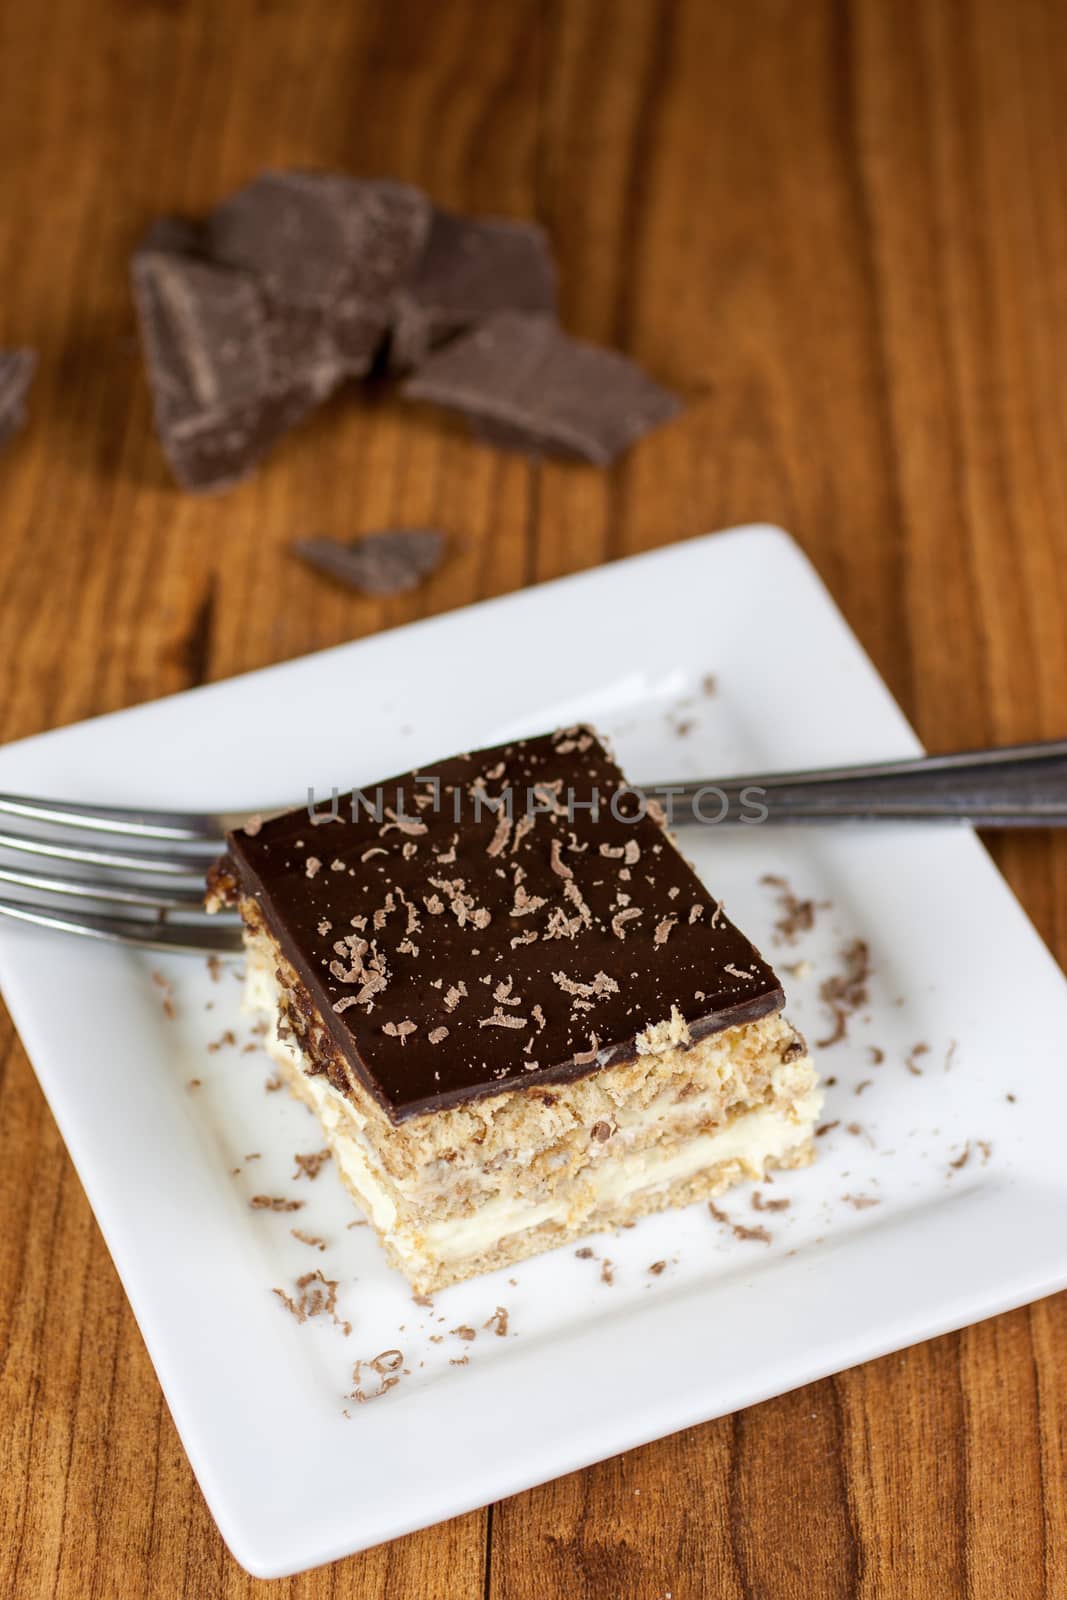 A layered Boston creme pie style dessert made with french vanilla filling and chocolate ganache topping.